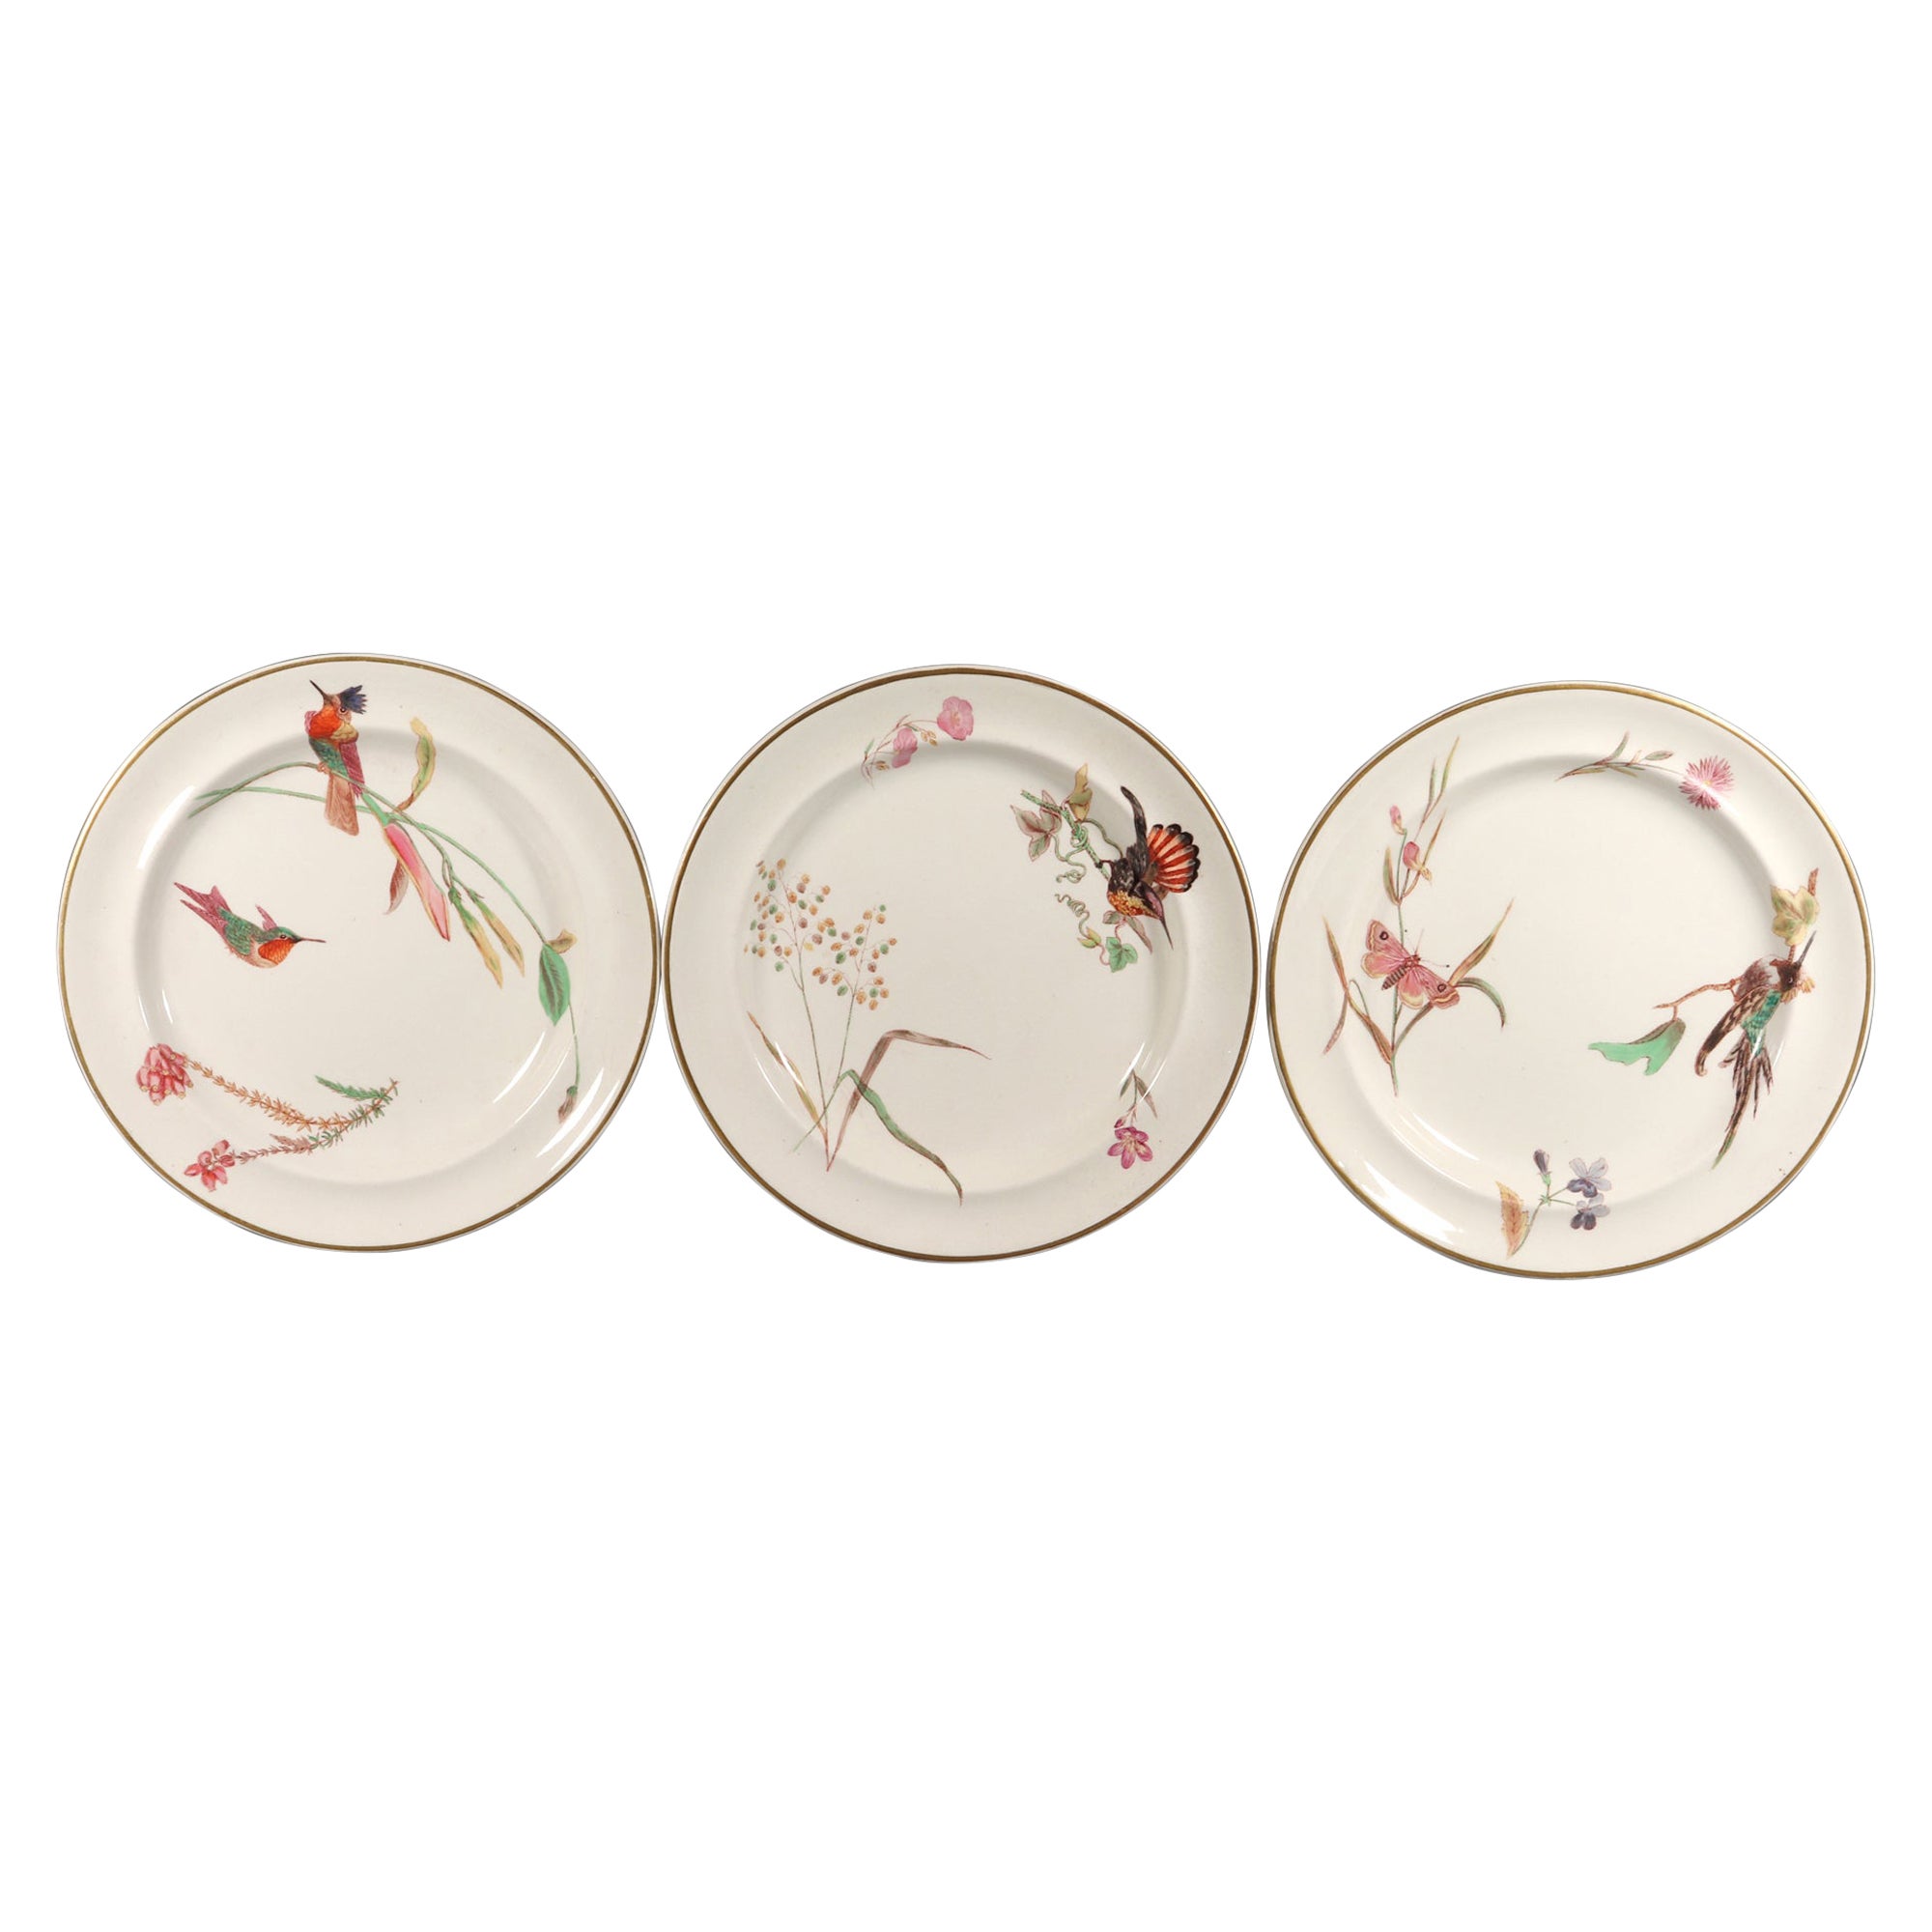 Wedgwood Creamware Hummingbird Butterfly & Flowers Pattern, No. 7961 For Sale